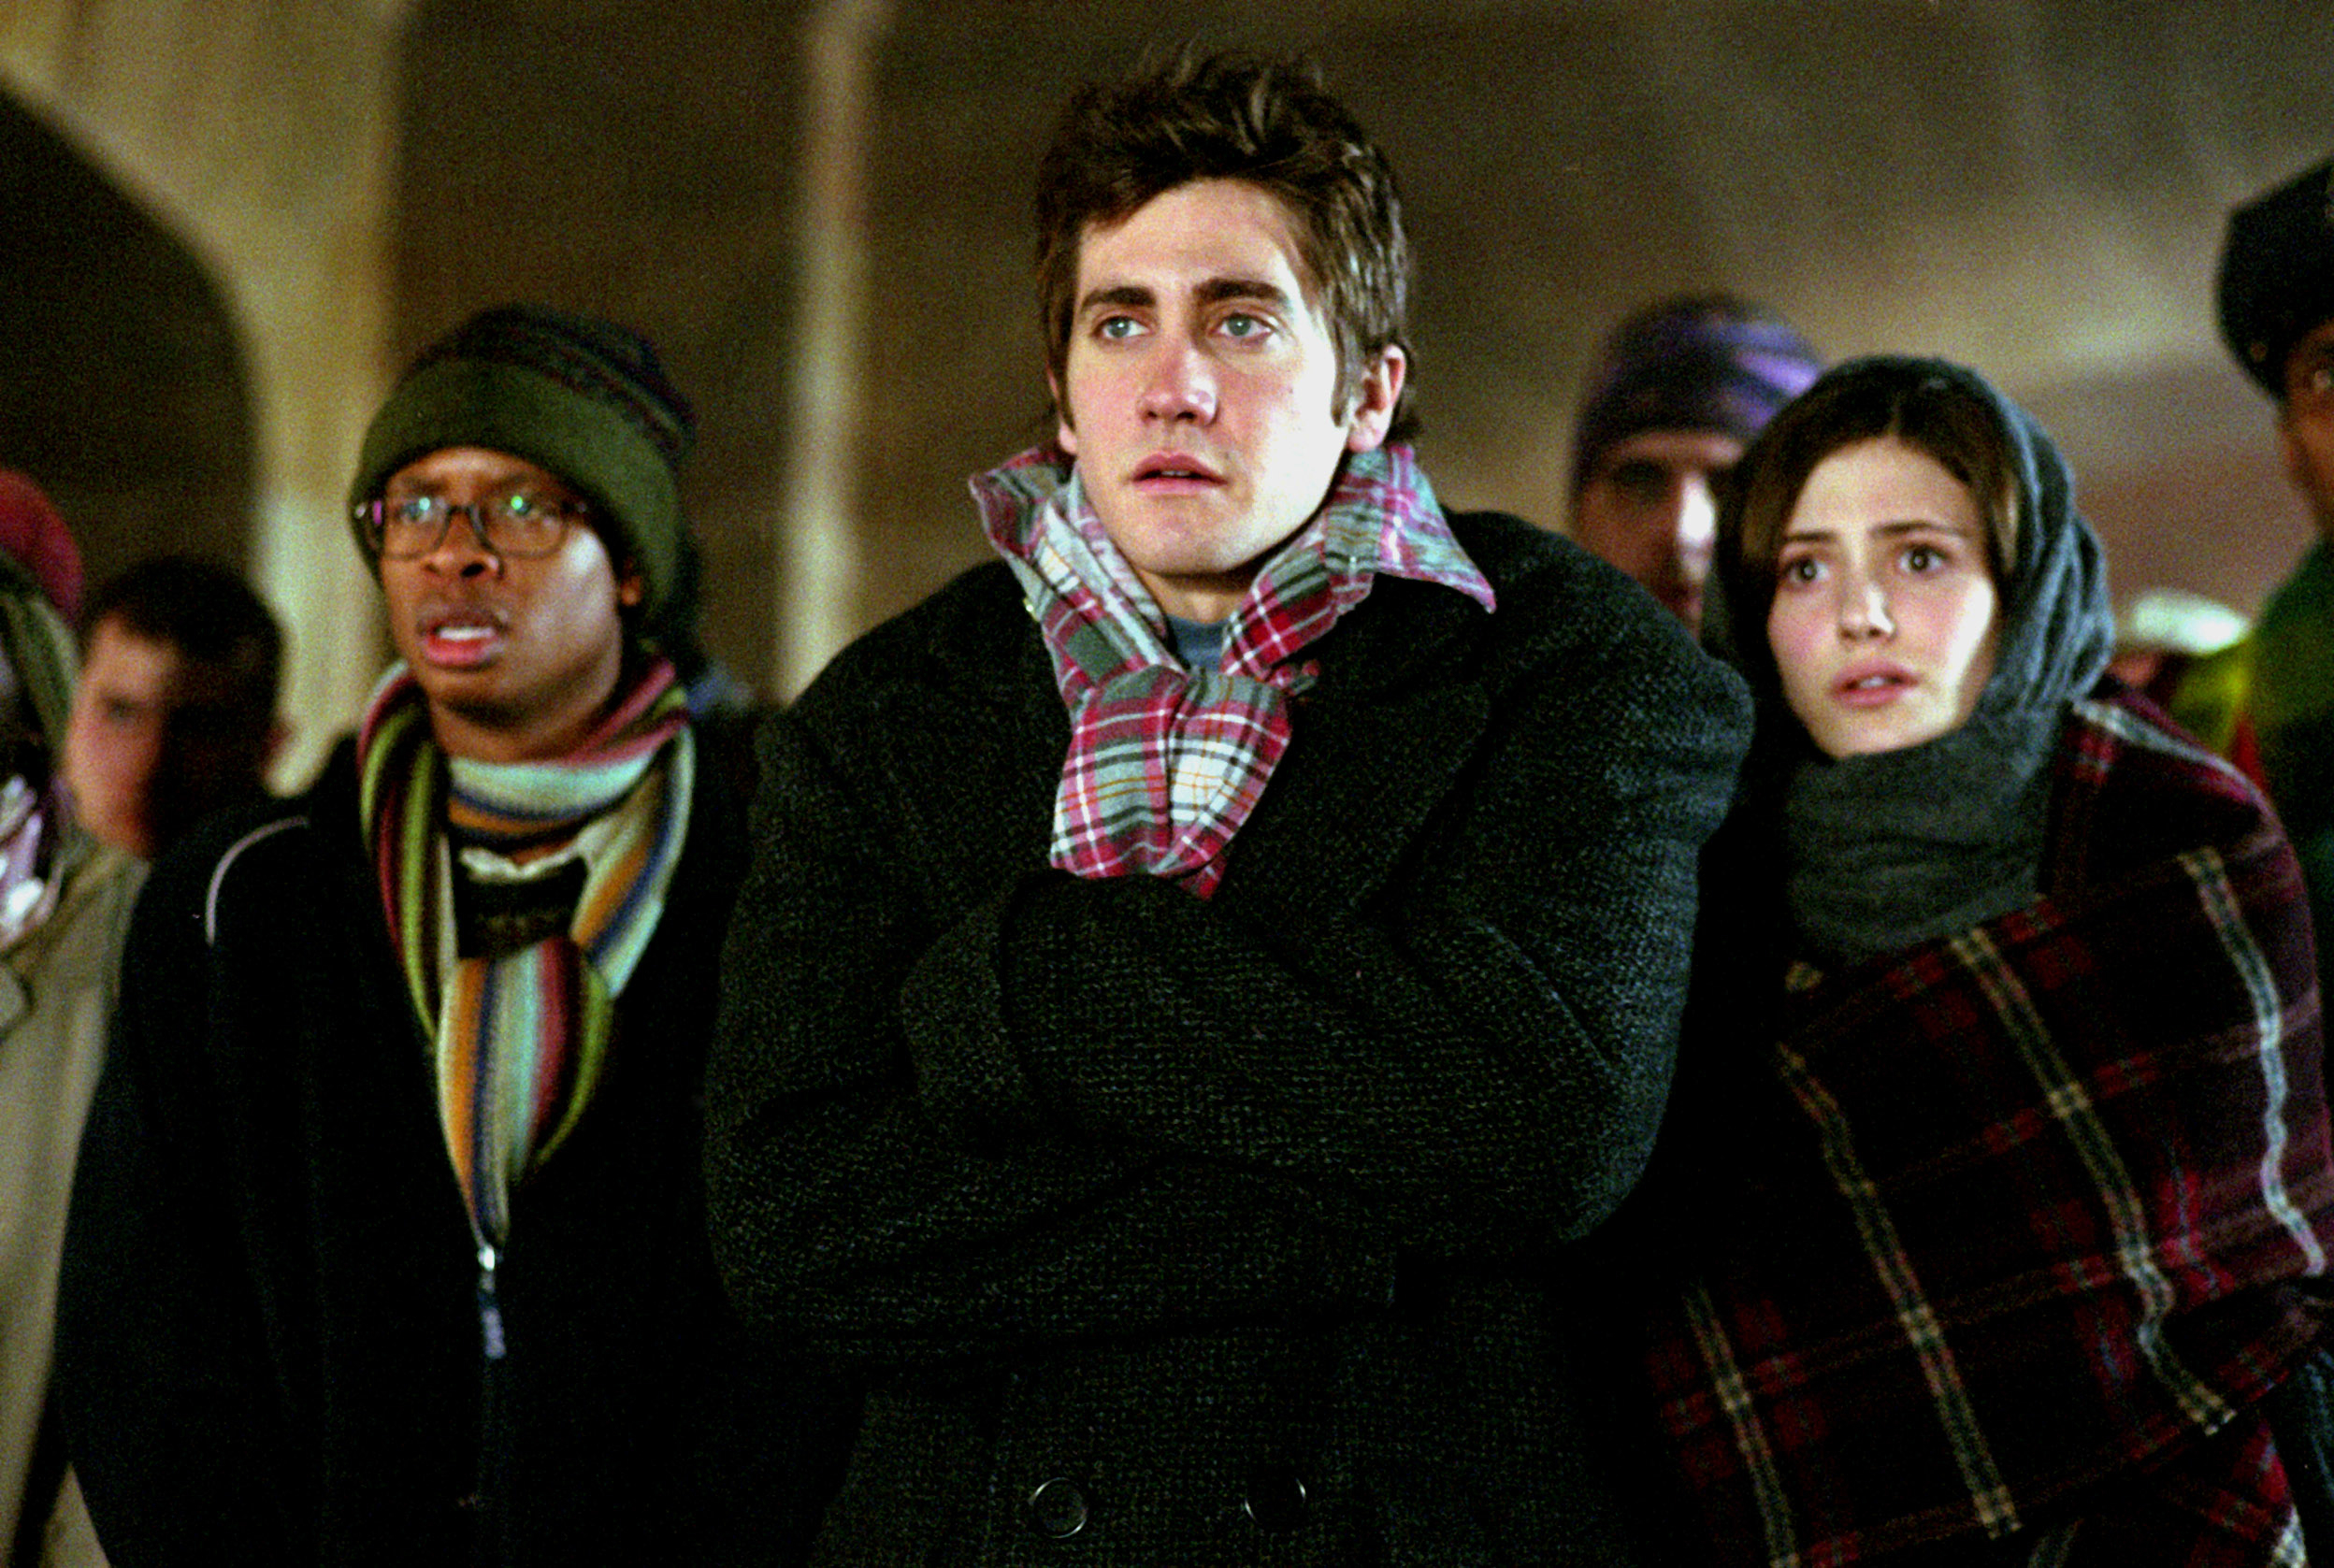 Lee Jordan, Oliver Wood, and Katie Bell, characters from Harry Potter, watching an event, in winter attire